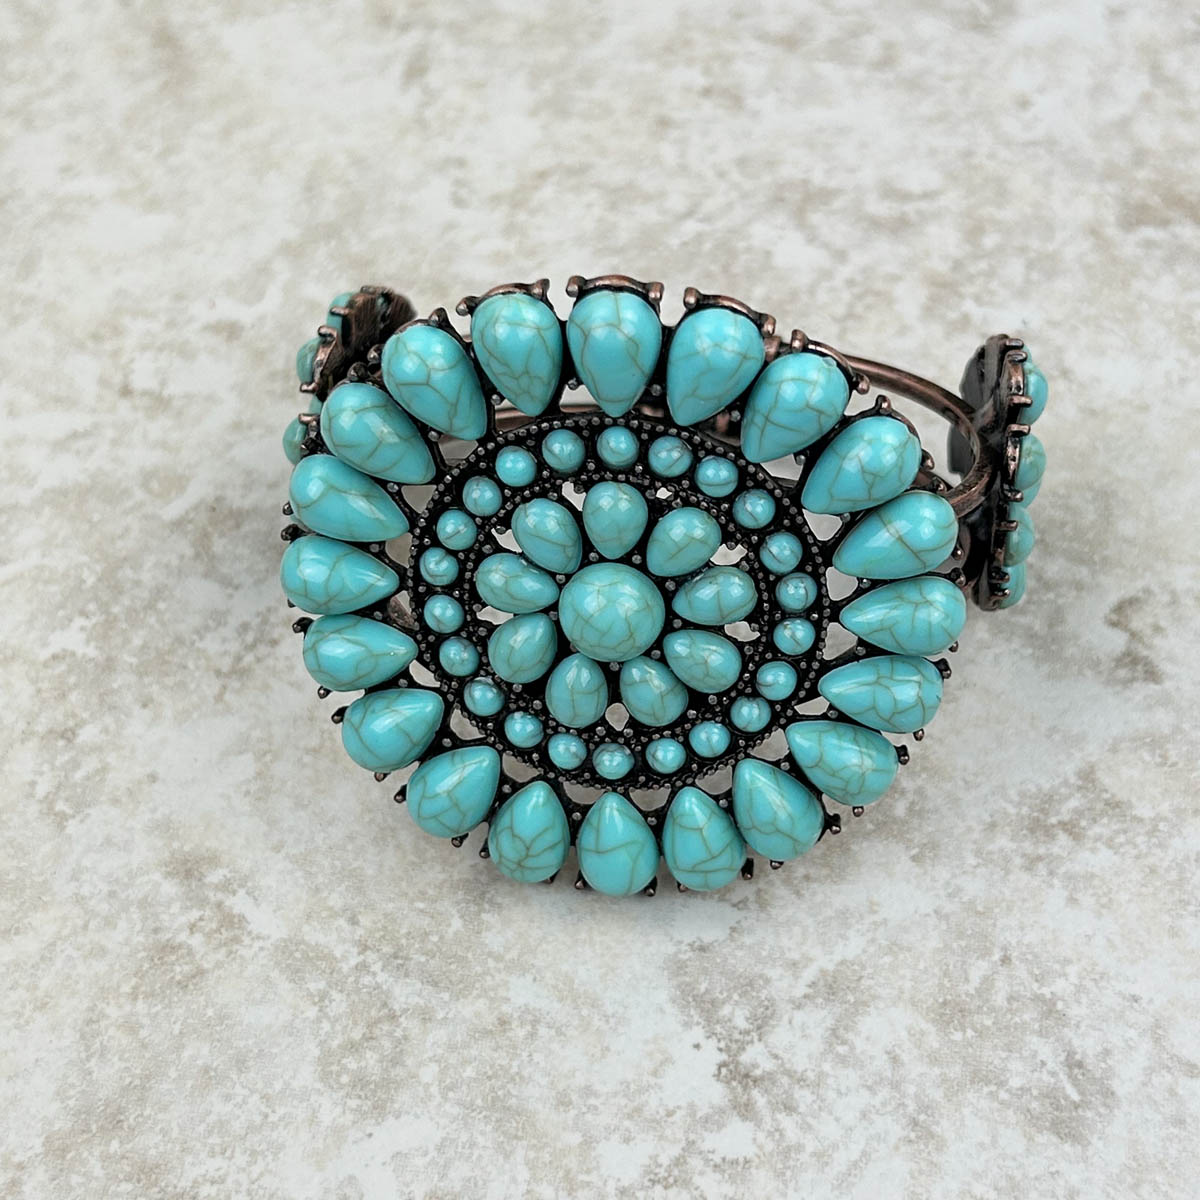 Cooper with Blue turquoise stone Concho Cuff Bracelet